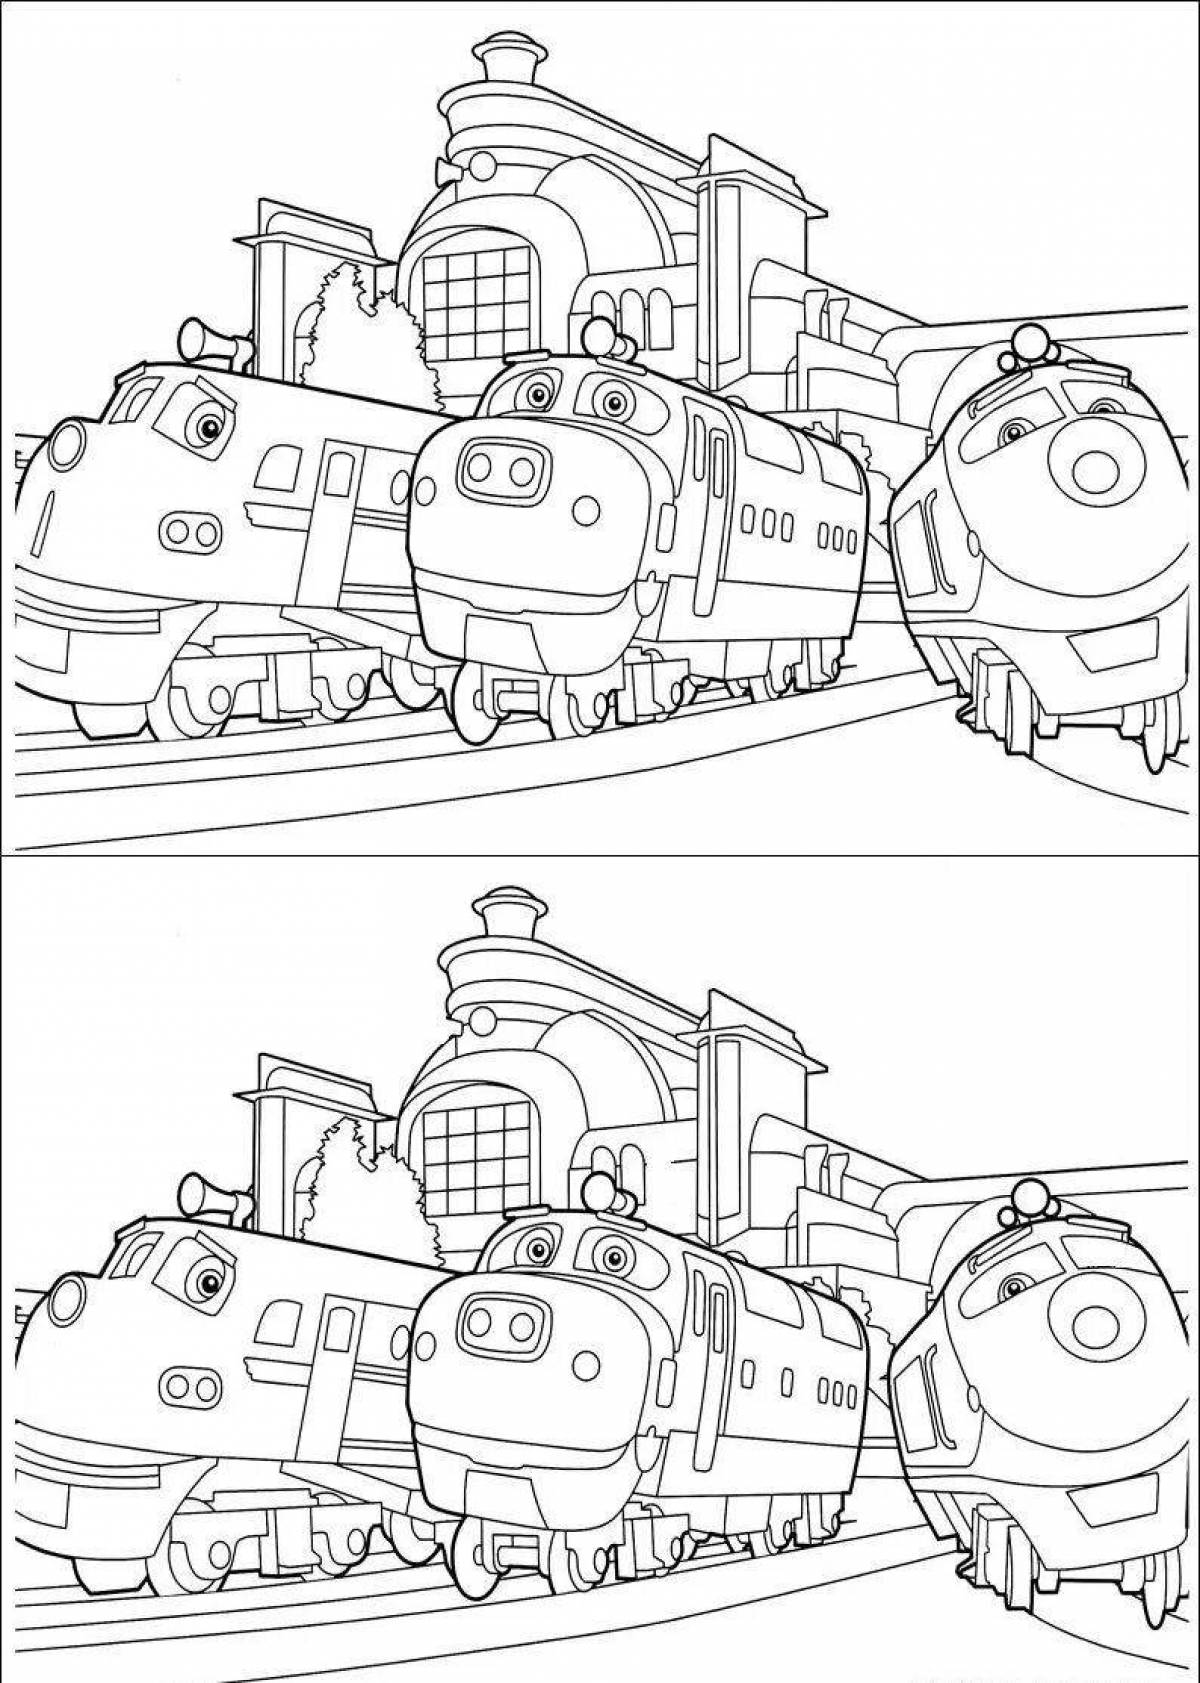 Nerving ghost train coloring page